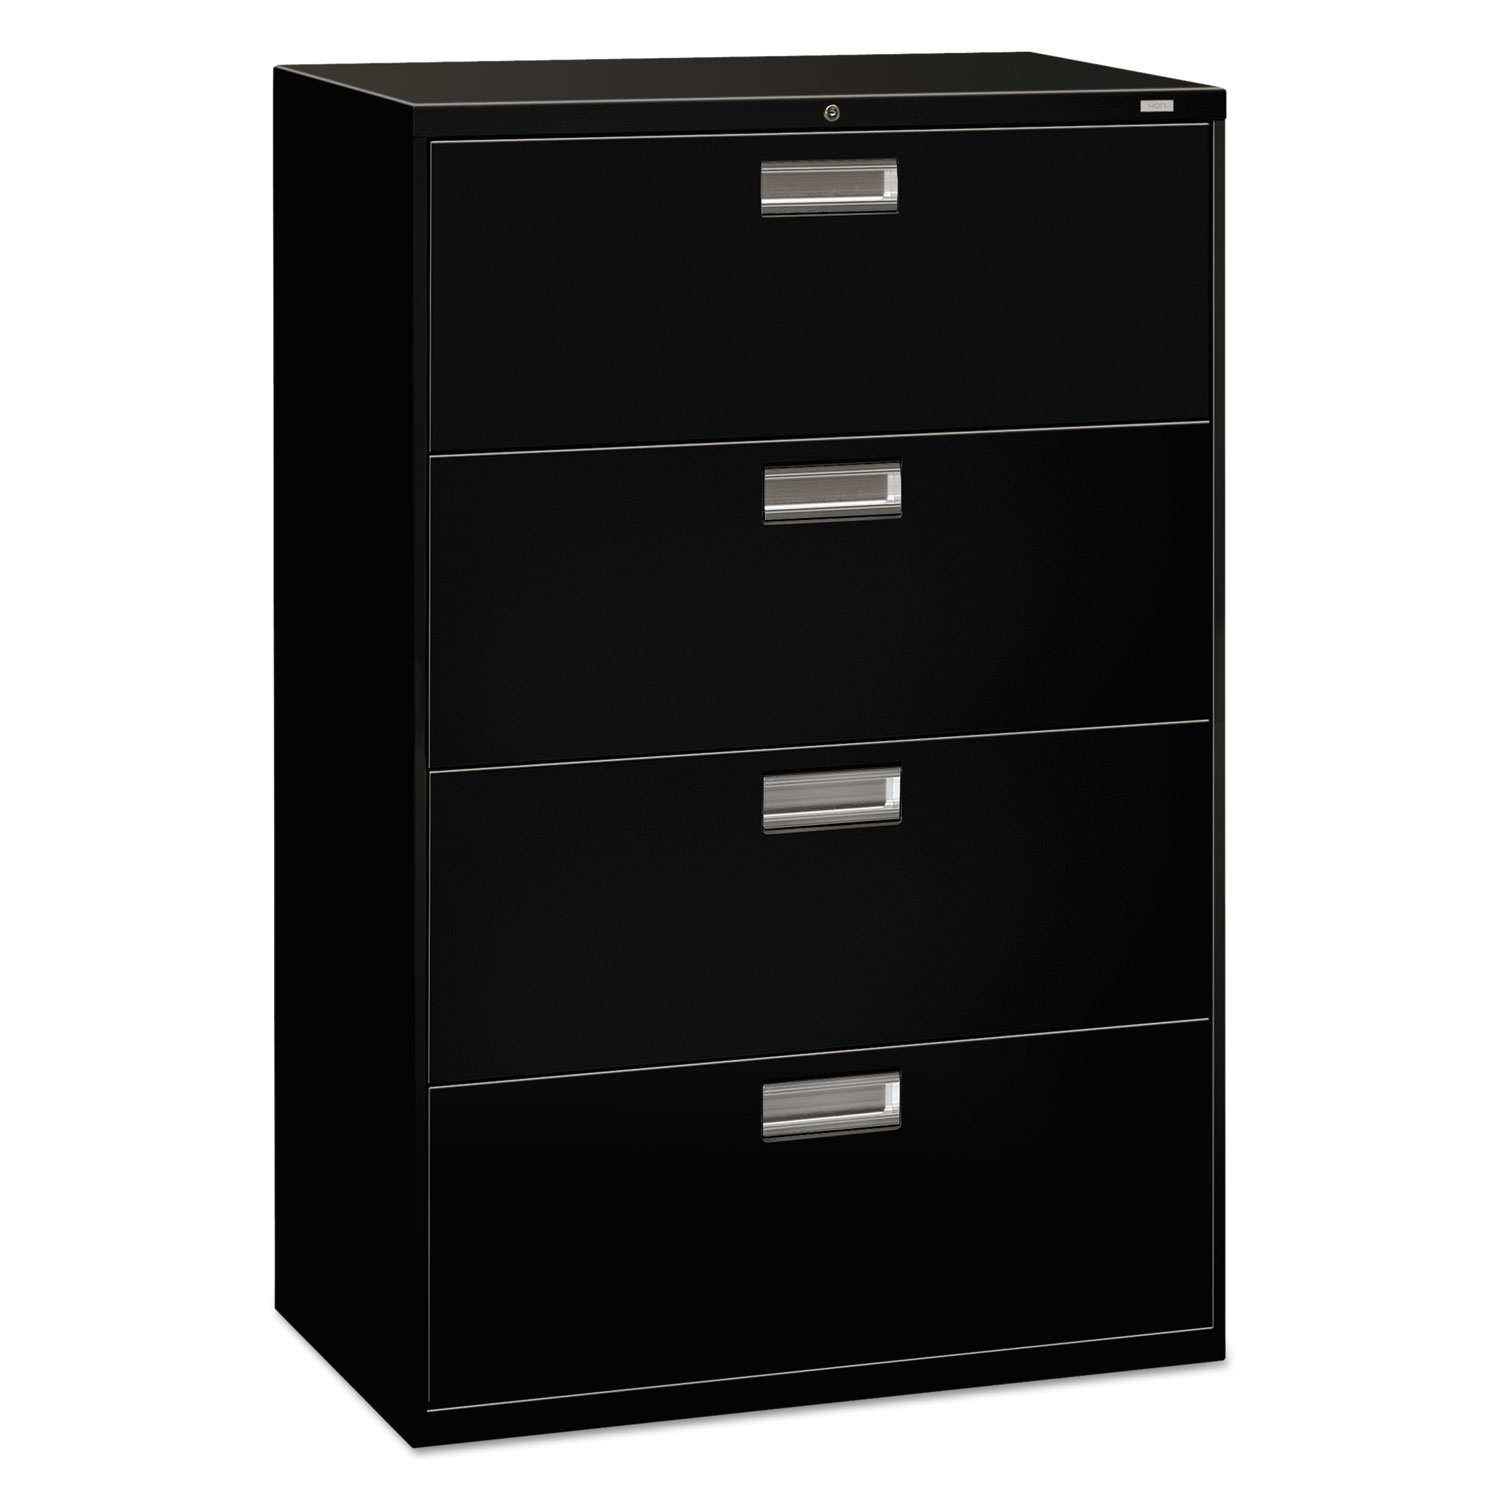 600 Series Four-Drawer Lateral File, 36w x 18d x 52 1/2h, Black